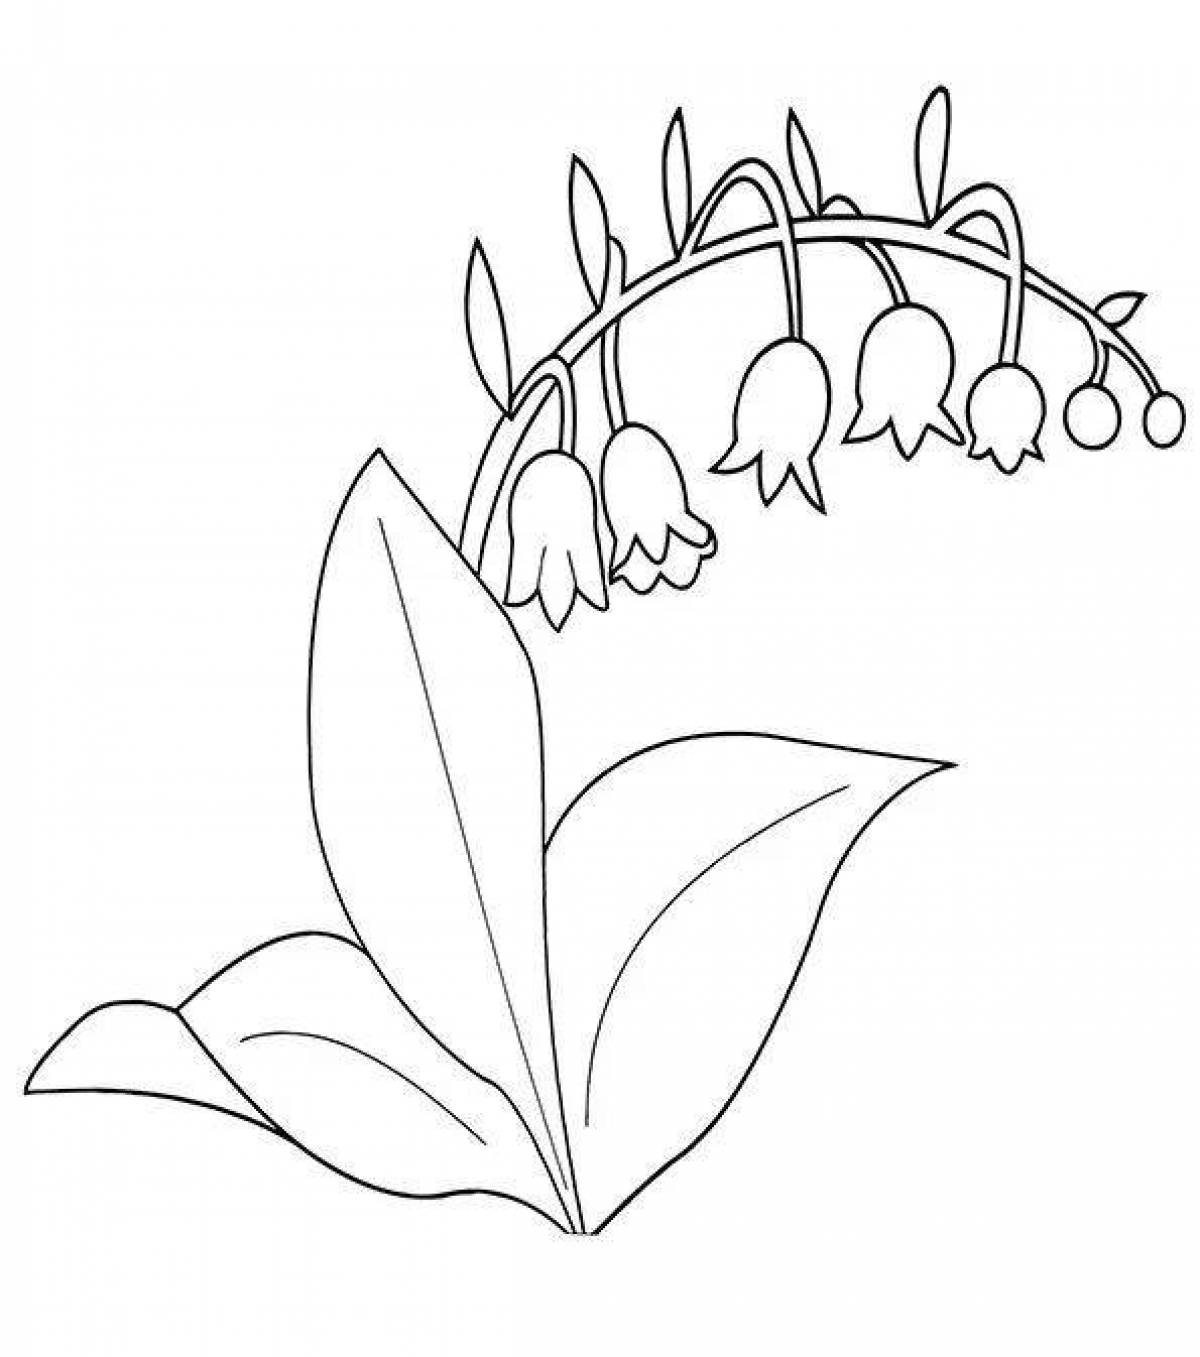 Coloring page royal plants of the red book of russia